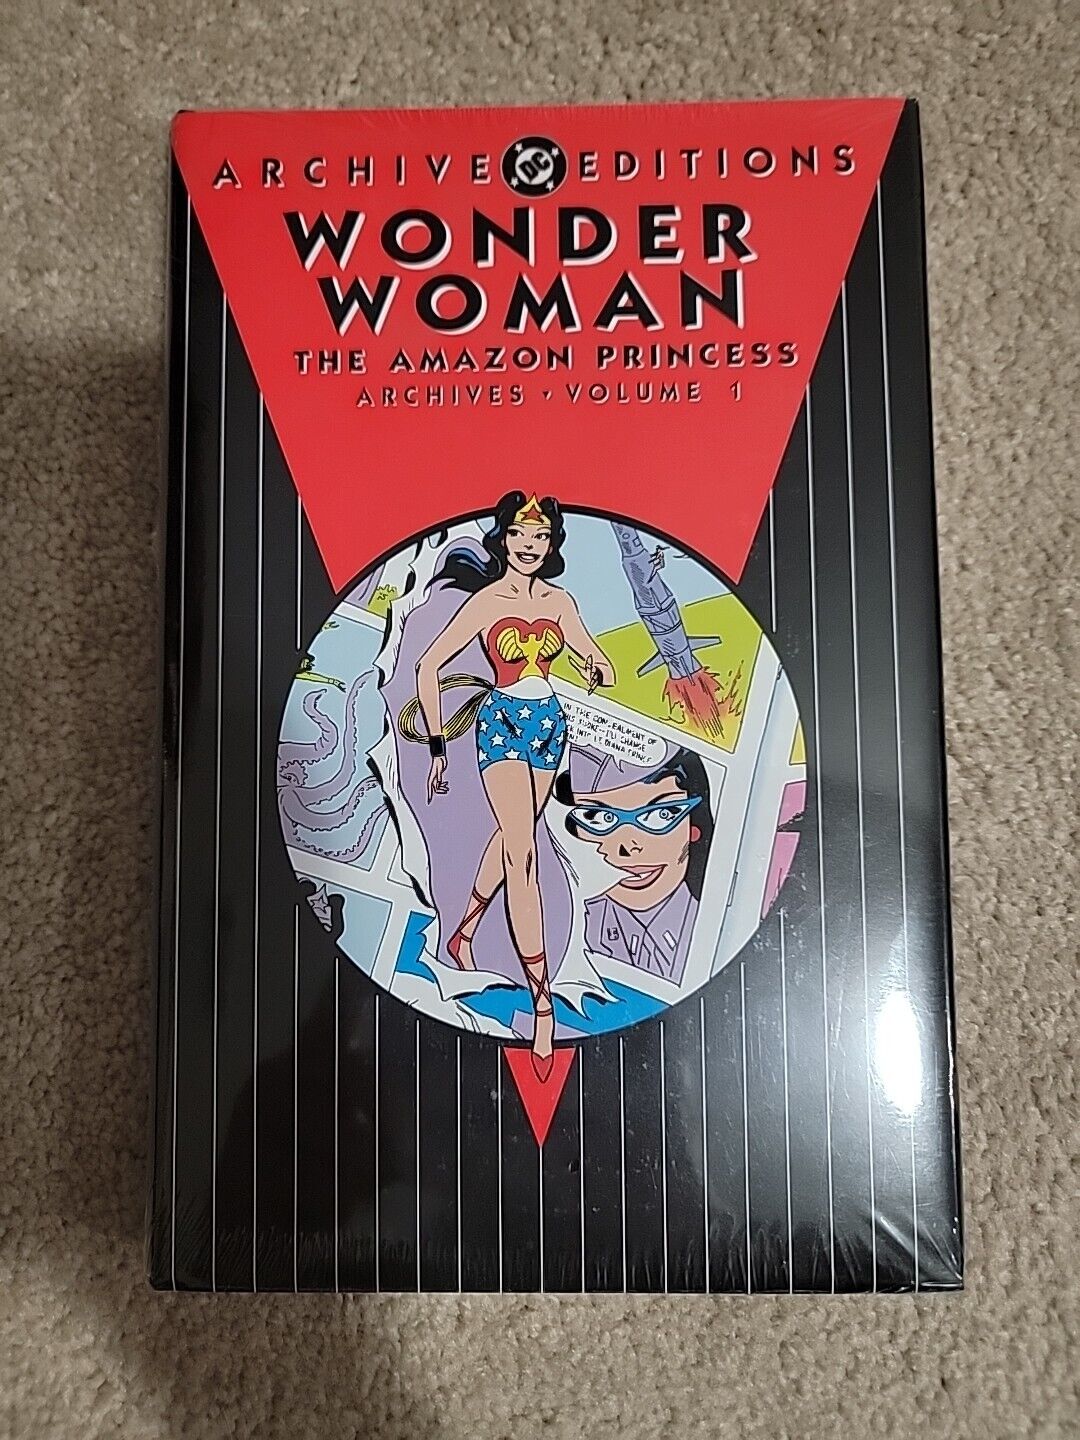 Wonder Woman: the Amazon Princess Archives #1 Hardcover NEW SEALED HC Silver Age